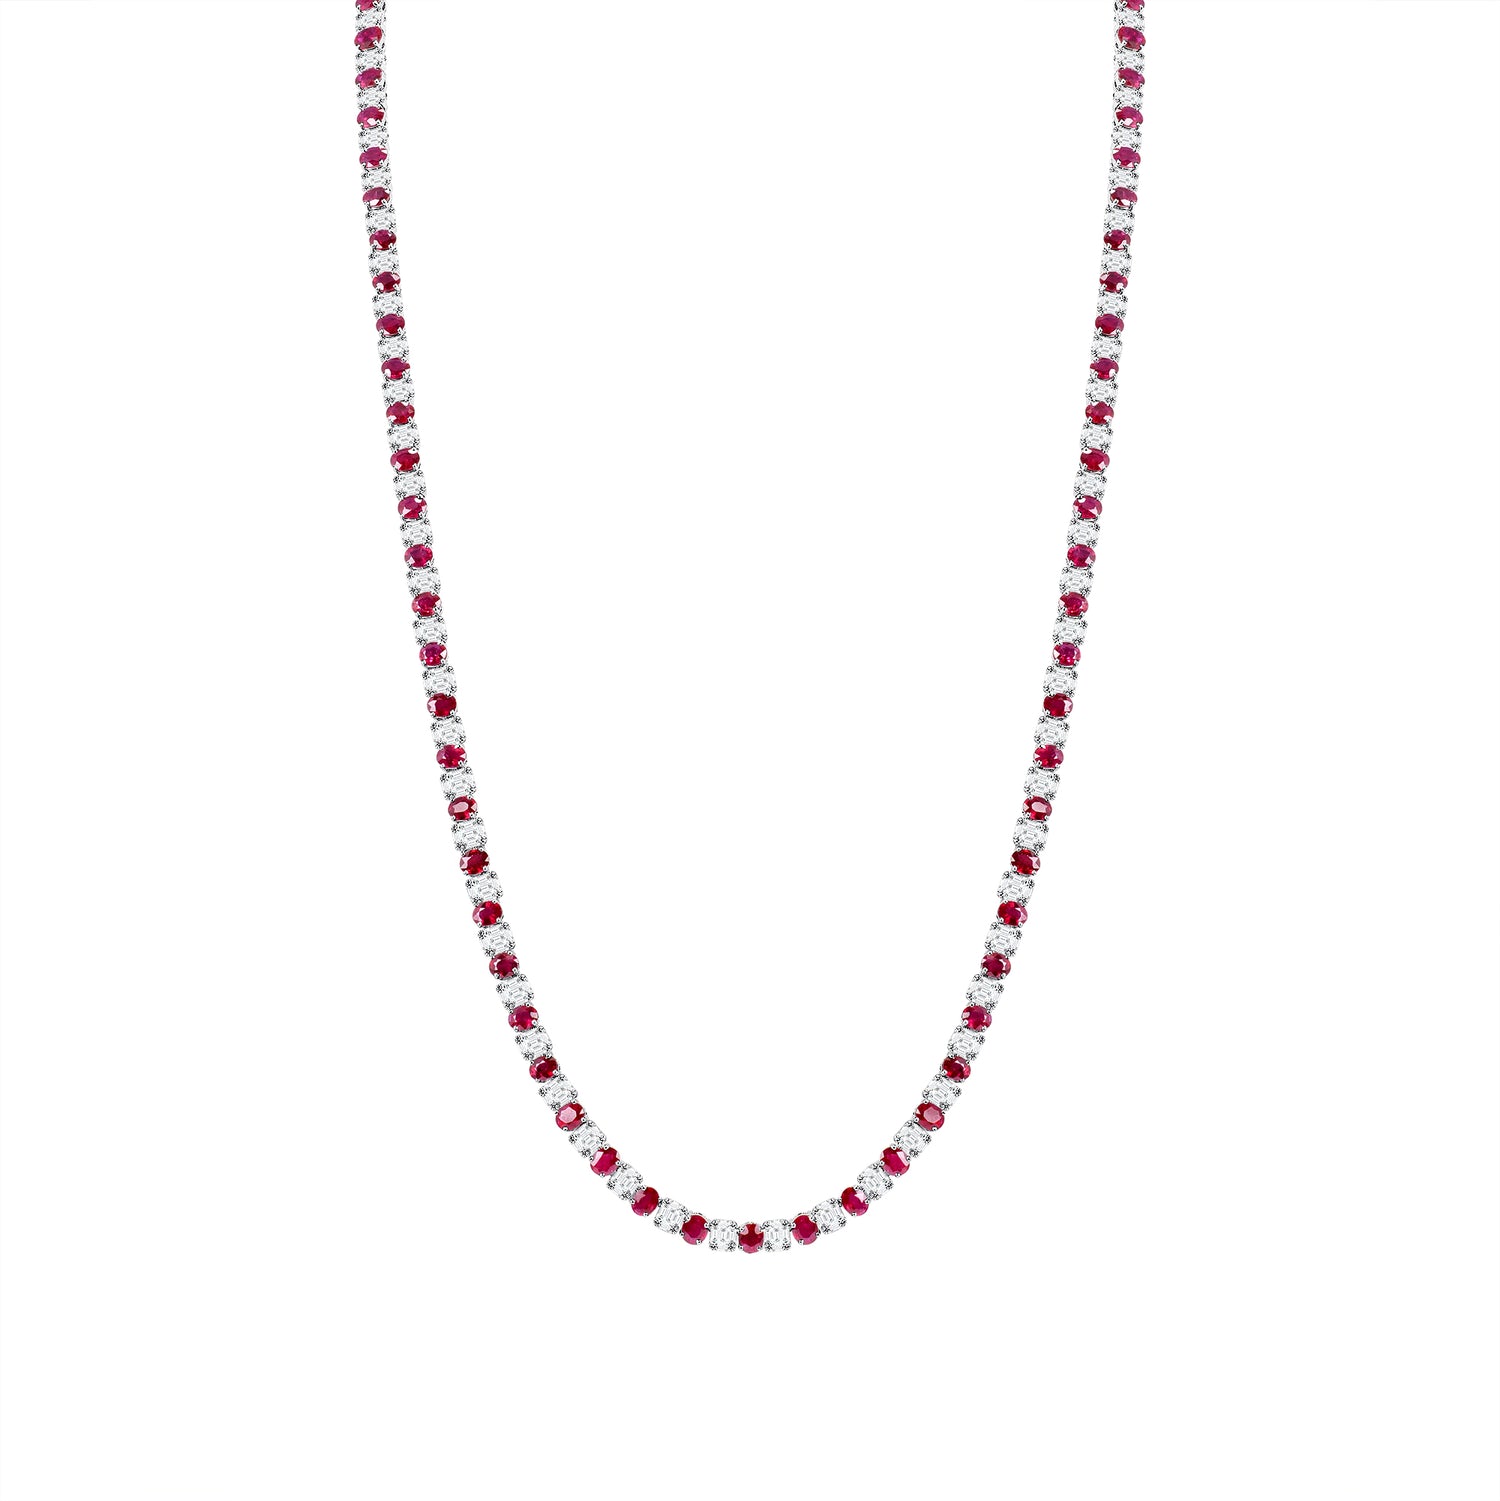 Slim 18K white gold necklace with 50.65 ct of vibrant rubies and sparkling white diamonds 